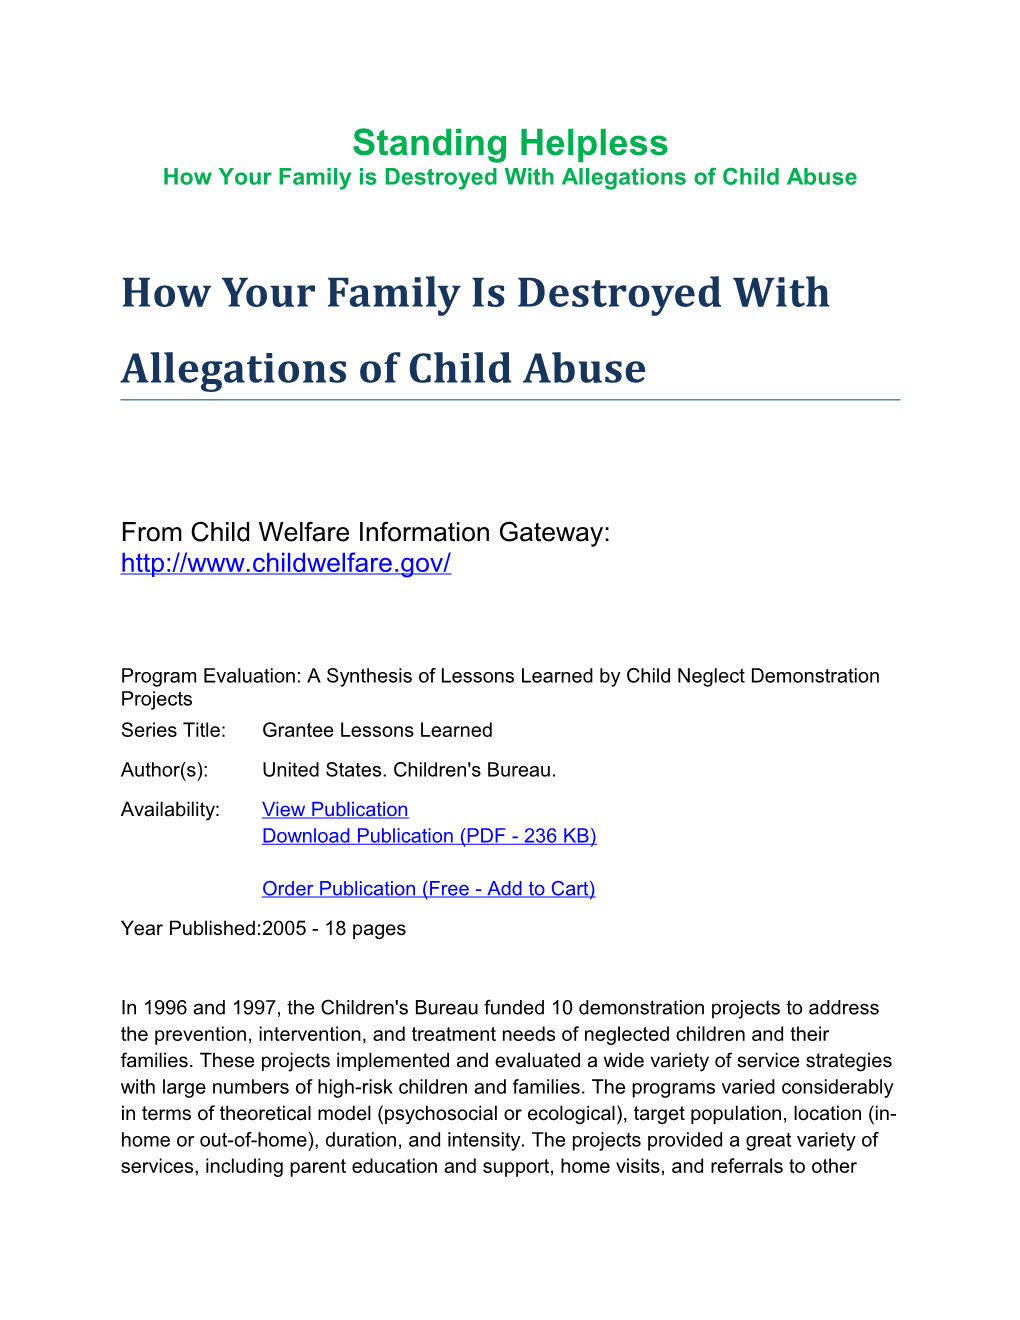 How Your Family Is Destroyed with Allegations of Child Abuse